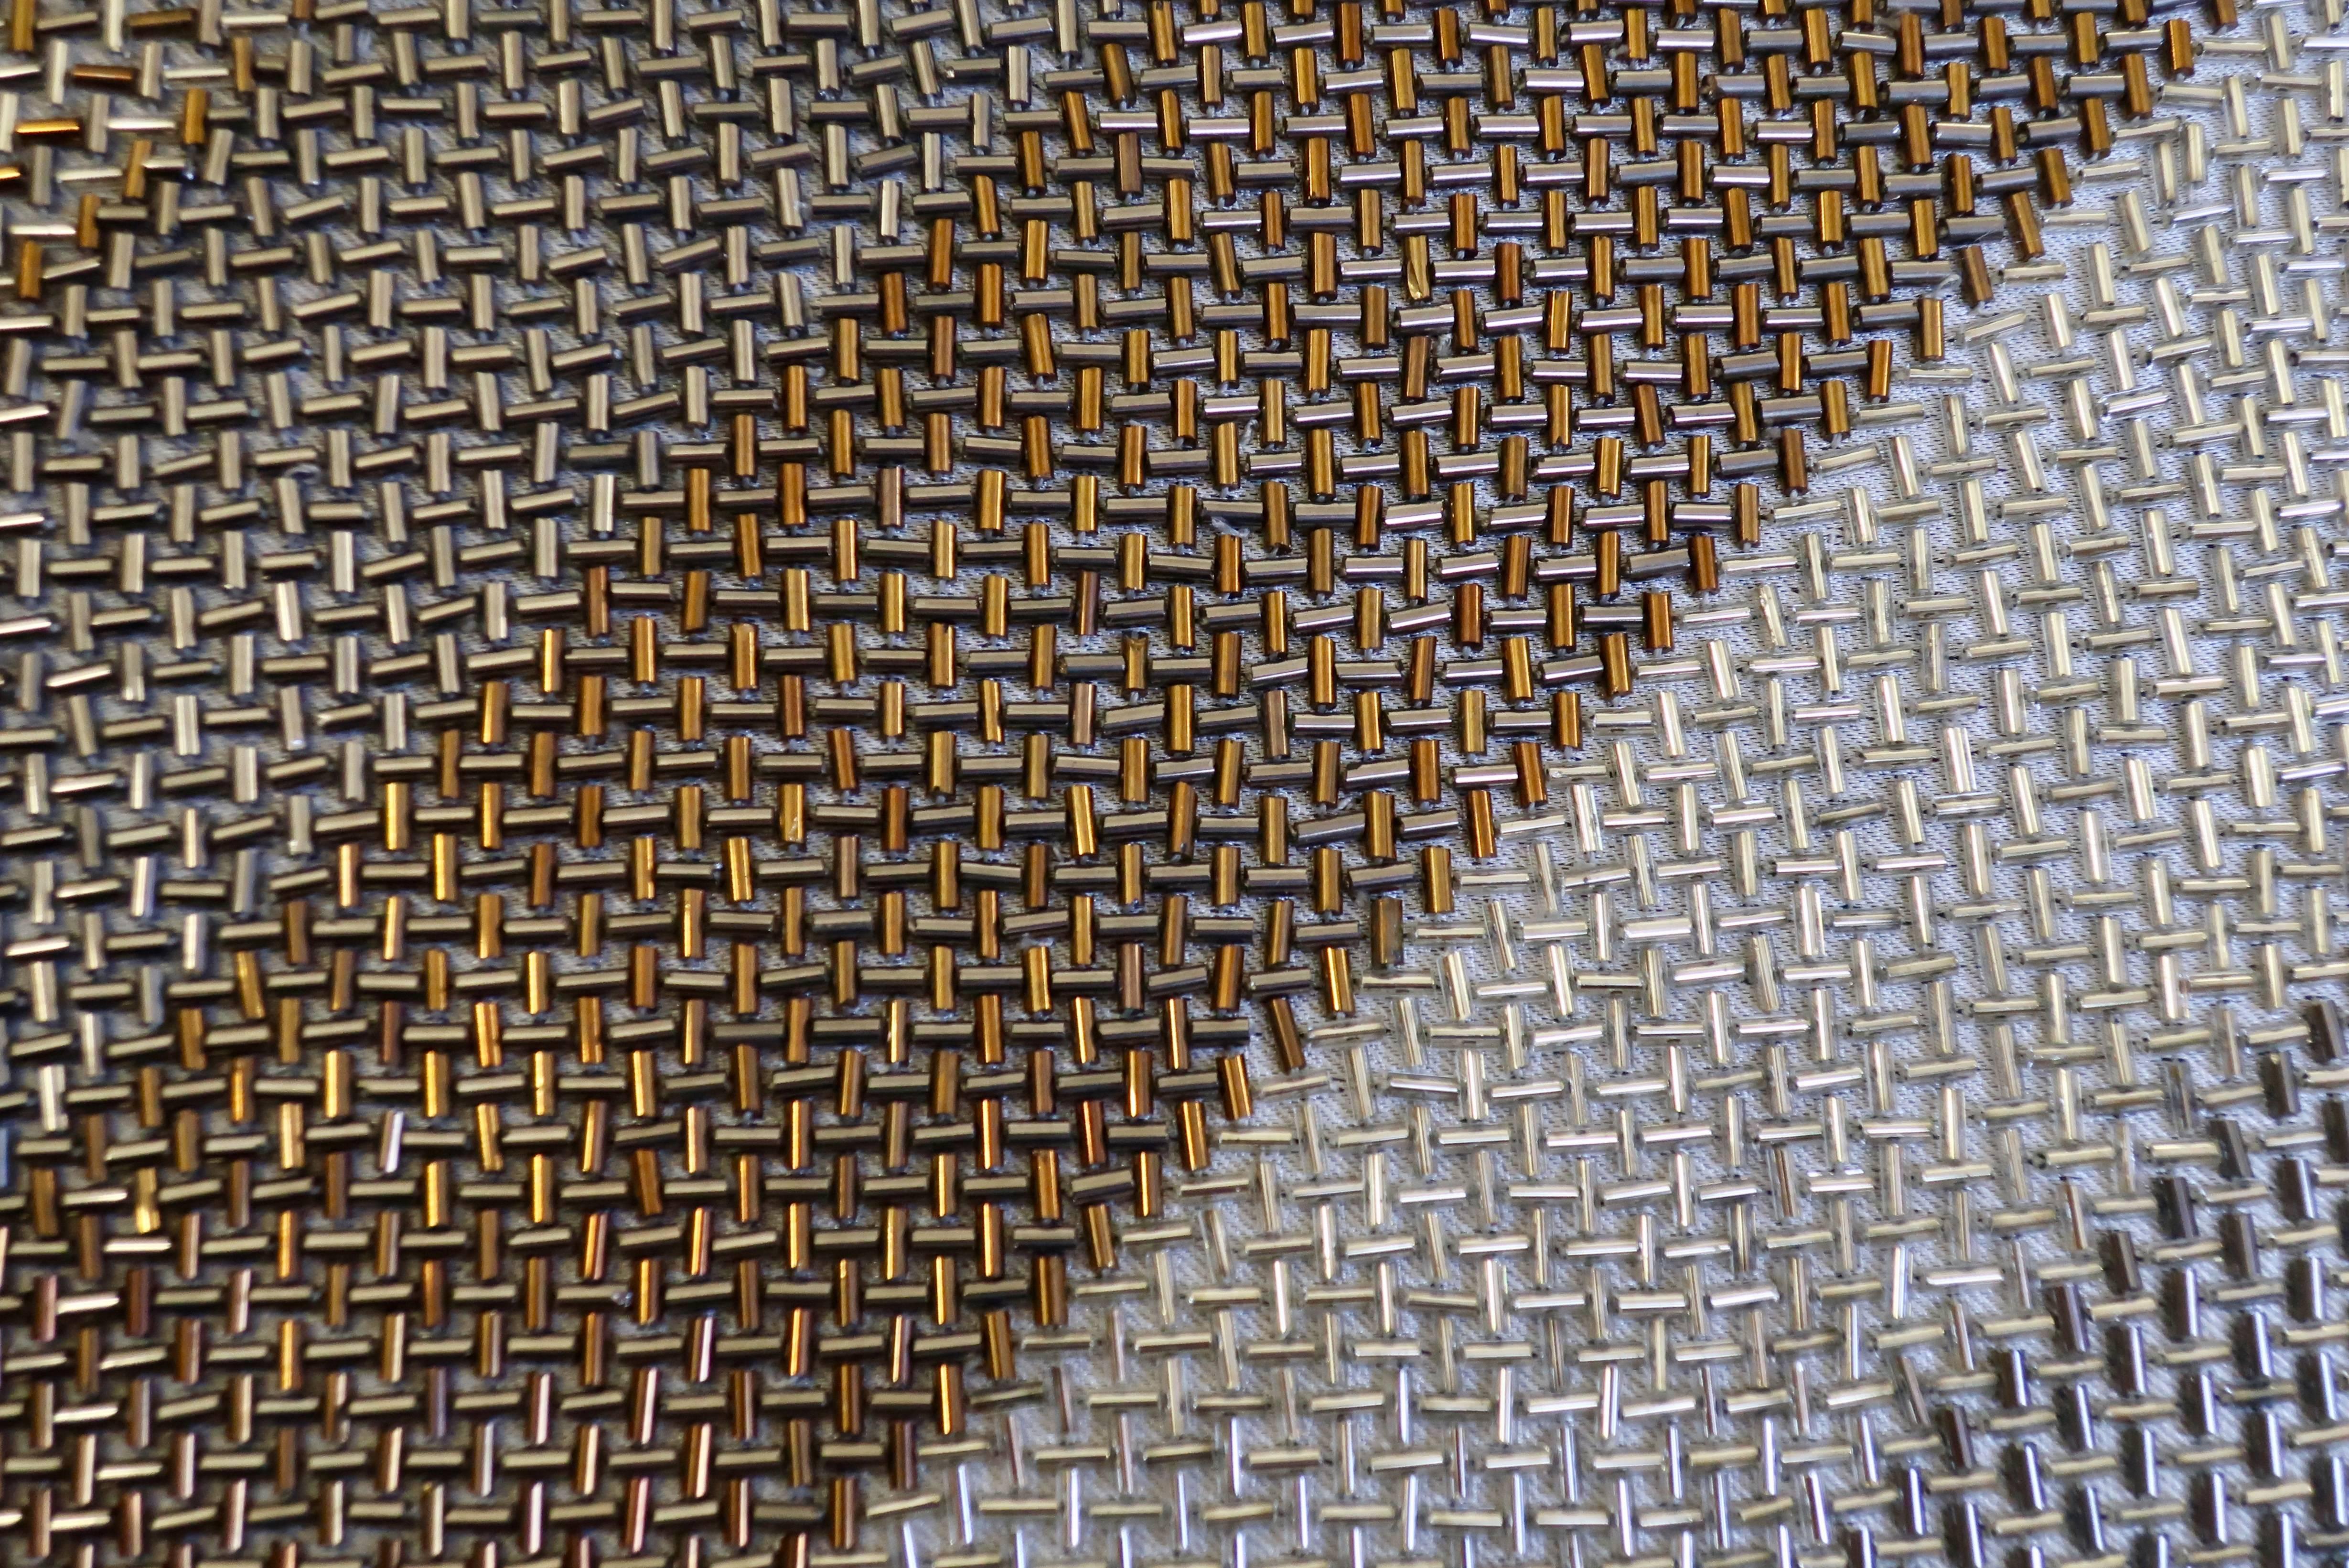 Beaded Handcrafted Embroidered Pillows Glass Beads Geometric Diagonal Grids Gold Silver For Sale